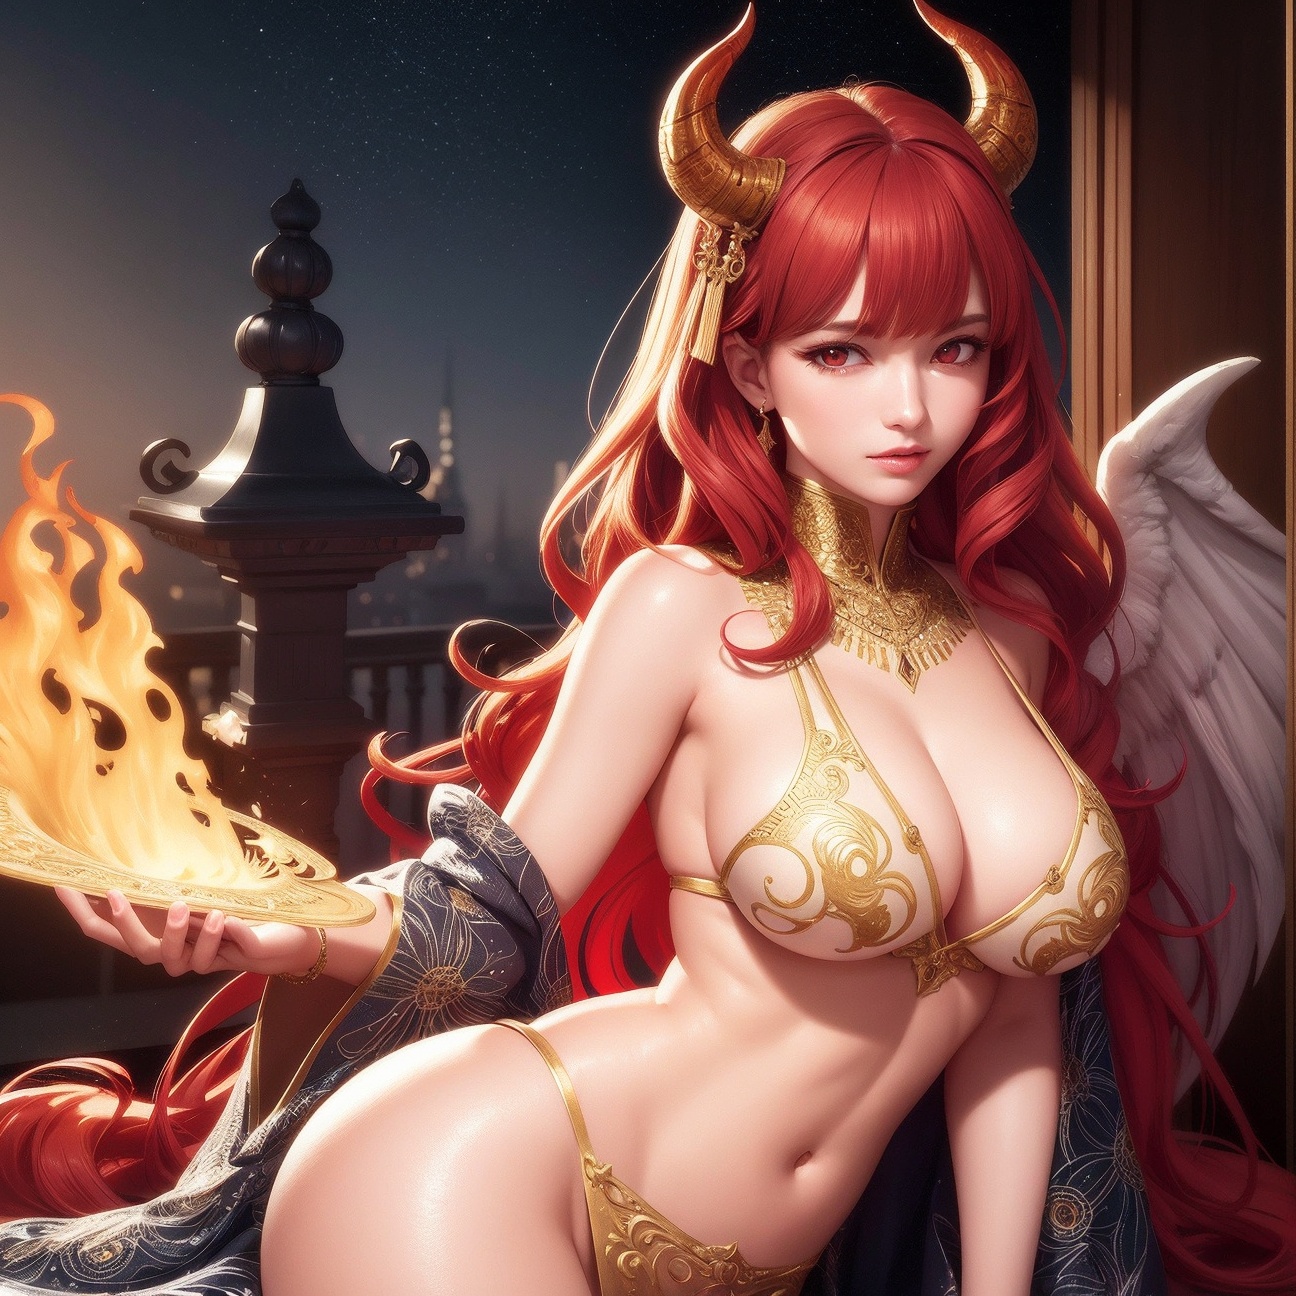 girls-with-large-breasts-Volcano-demon-II